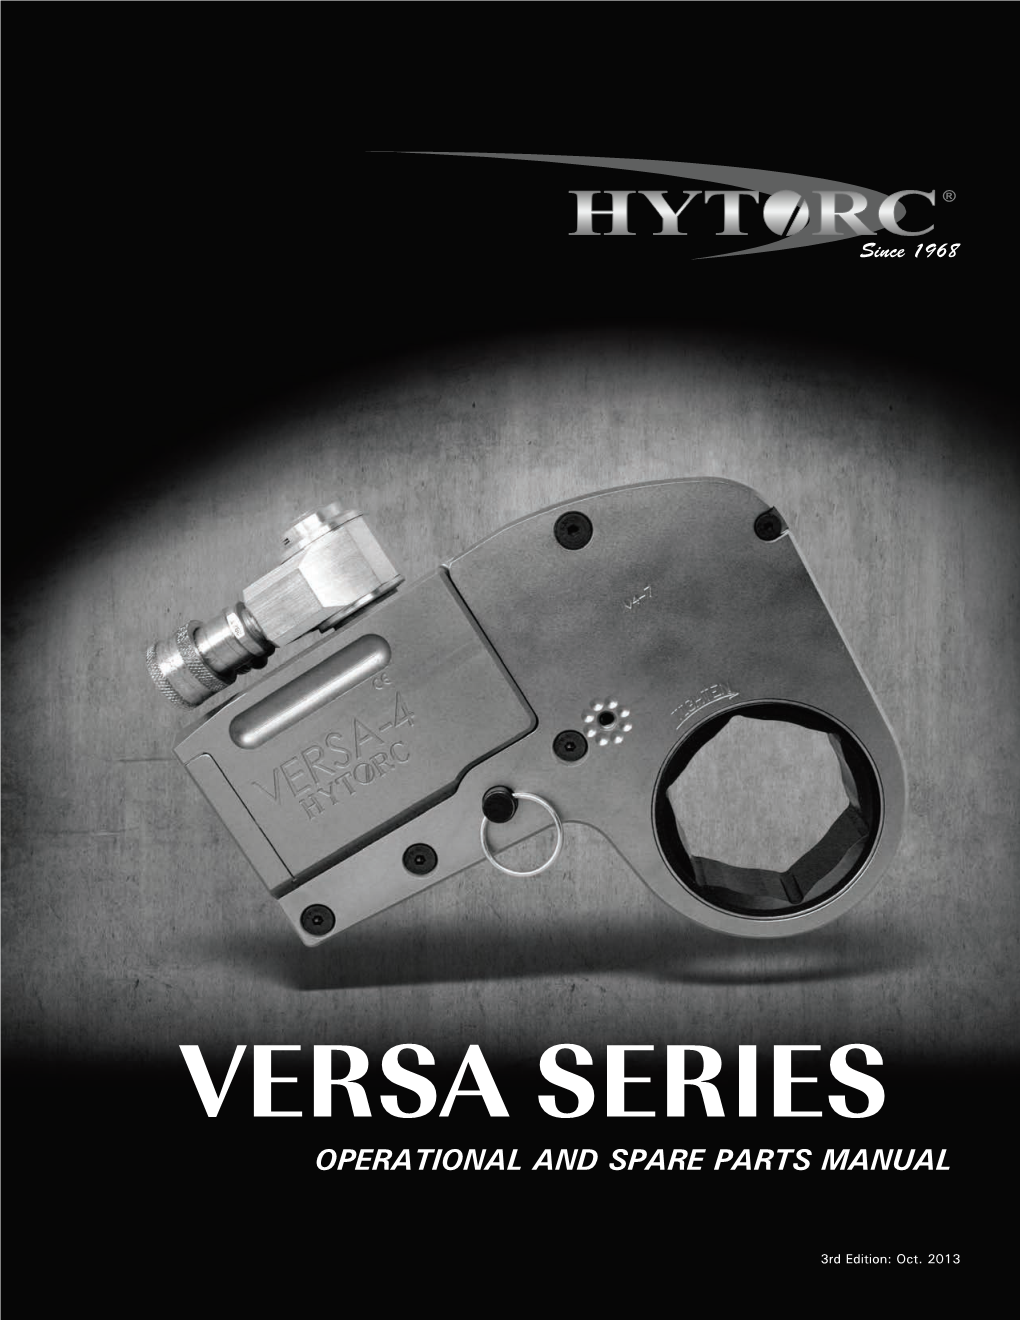 Versa Series Operational and Spare Parts Manual